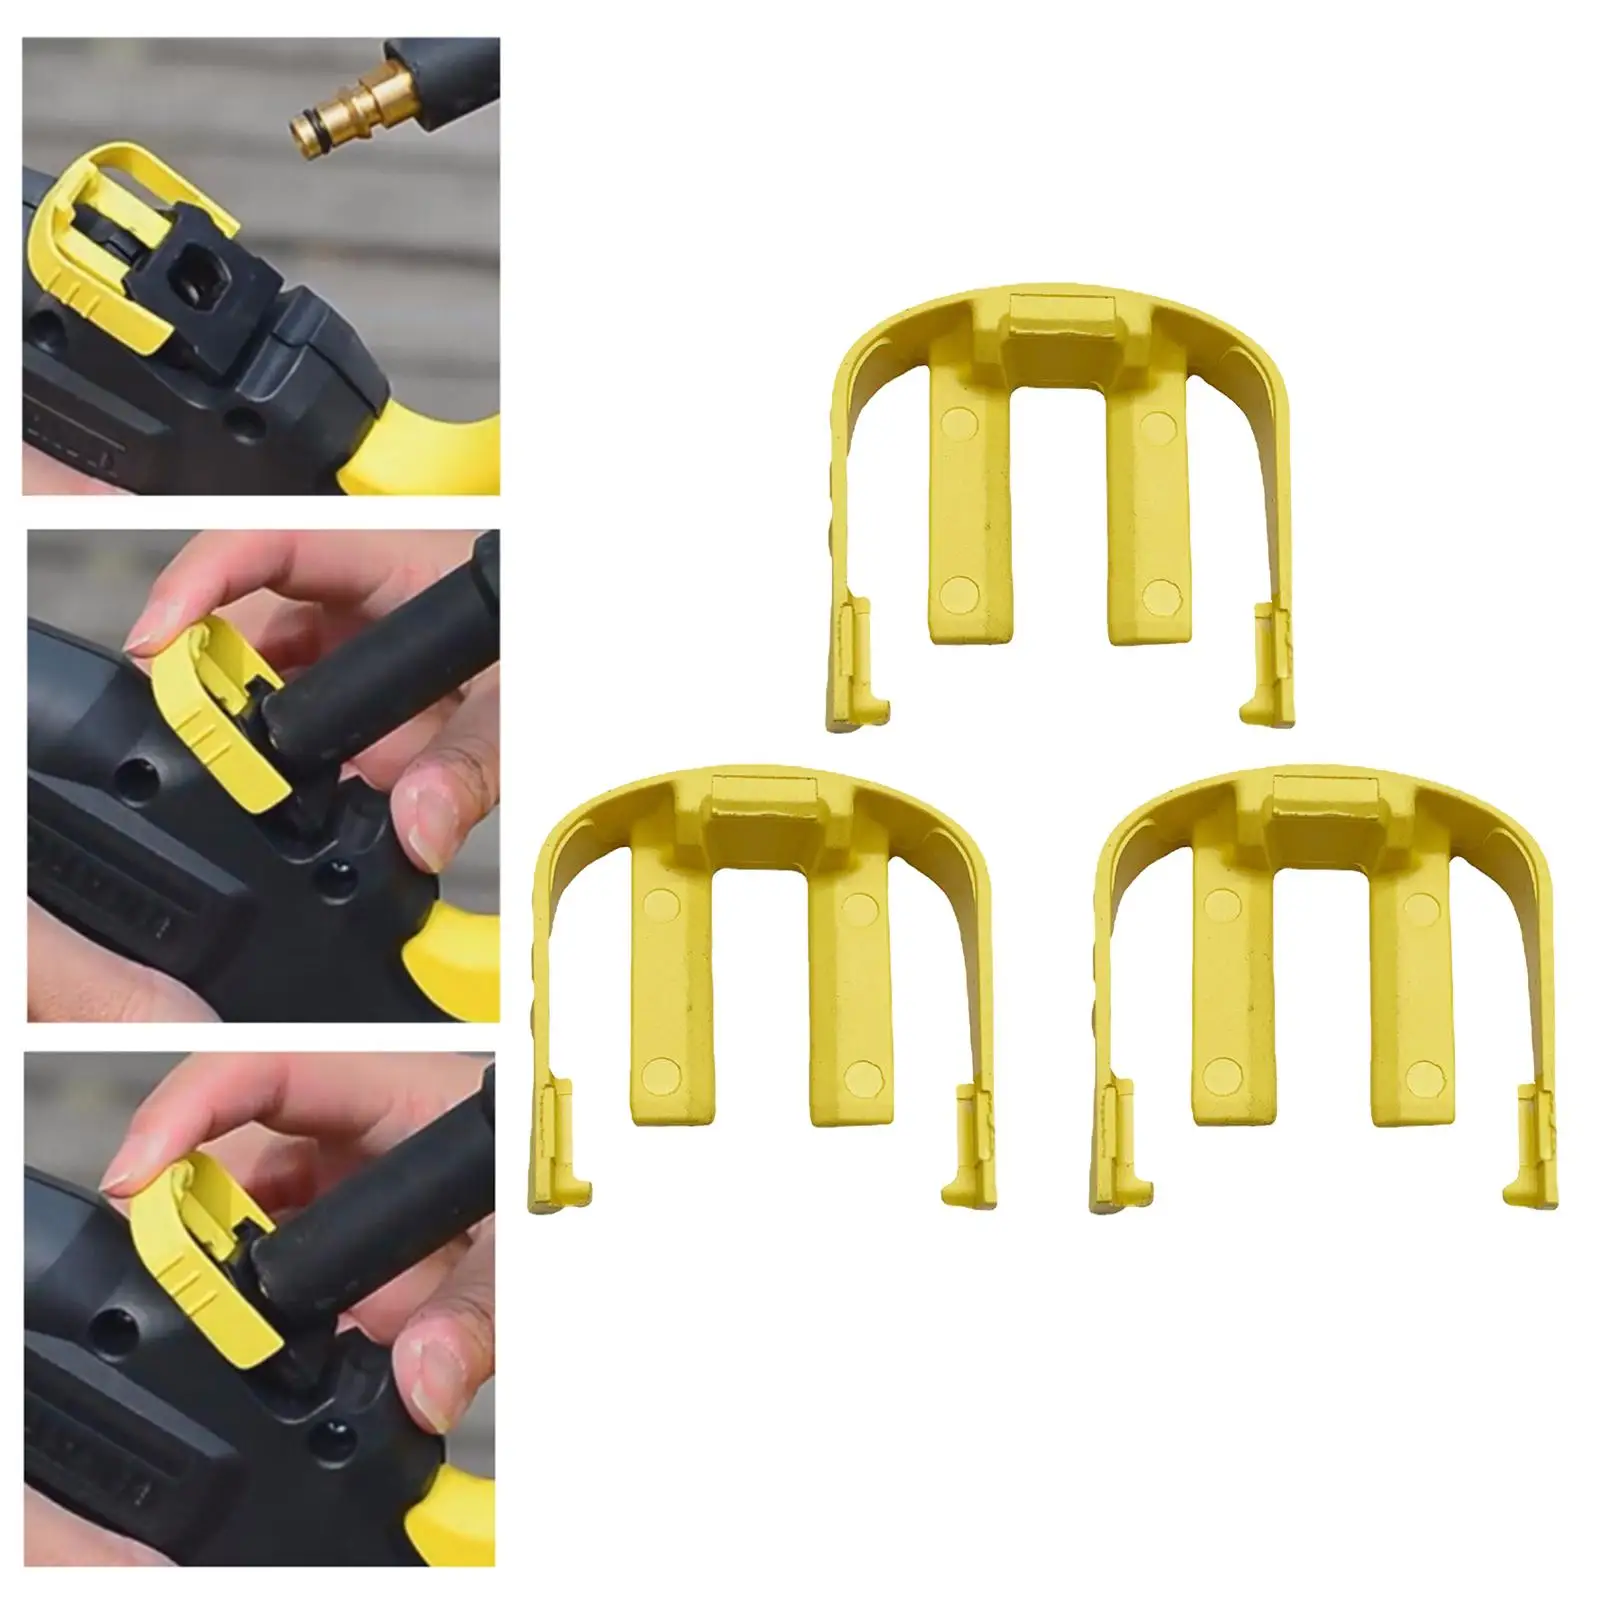 3x C Yellow Clips Replaces Snap Rings for K2 K3 K7 Power Washer     Hose